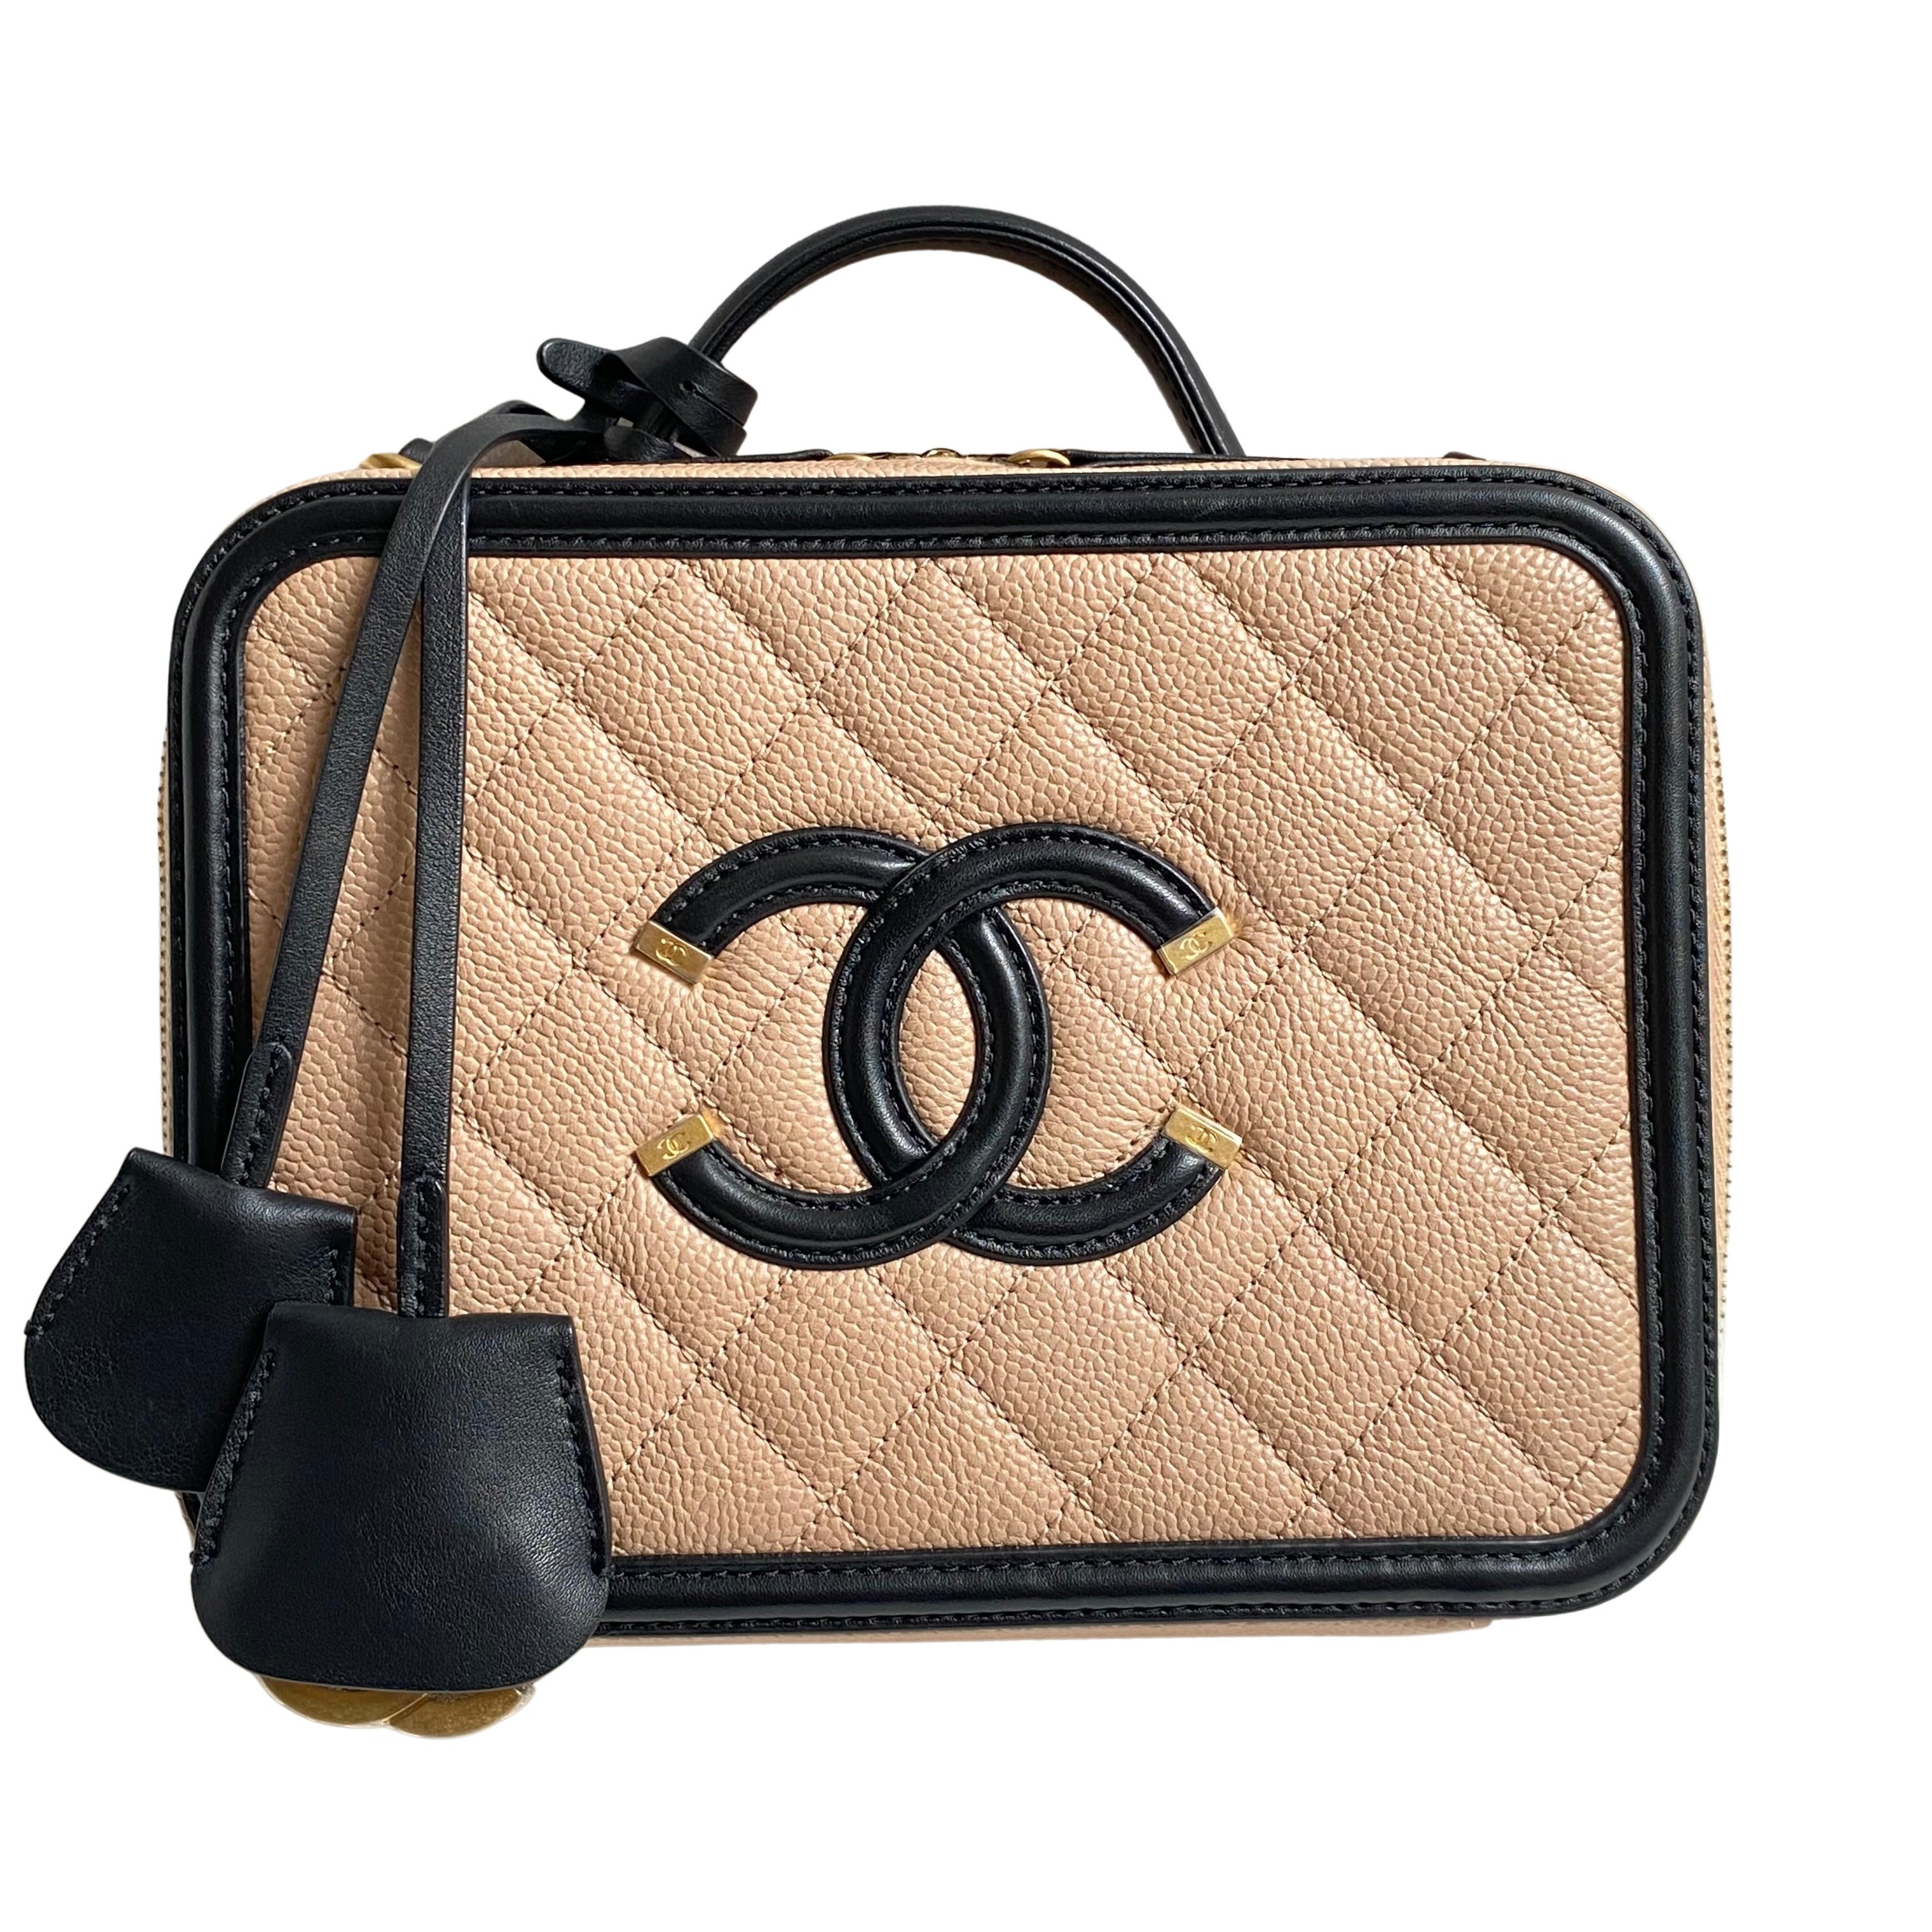 Chanel Vintage Patent CC Vanity Case - Black Cosmetic Bags, Accessories -  CHA725942